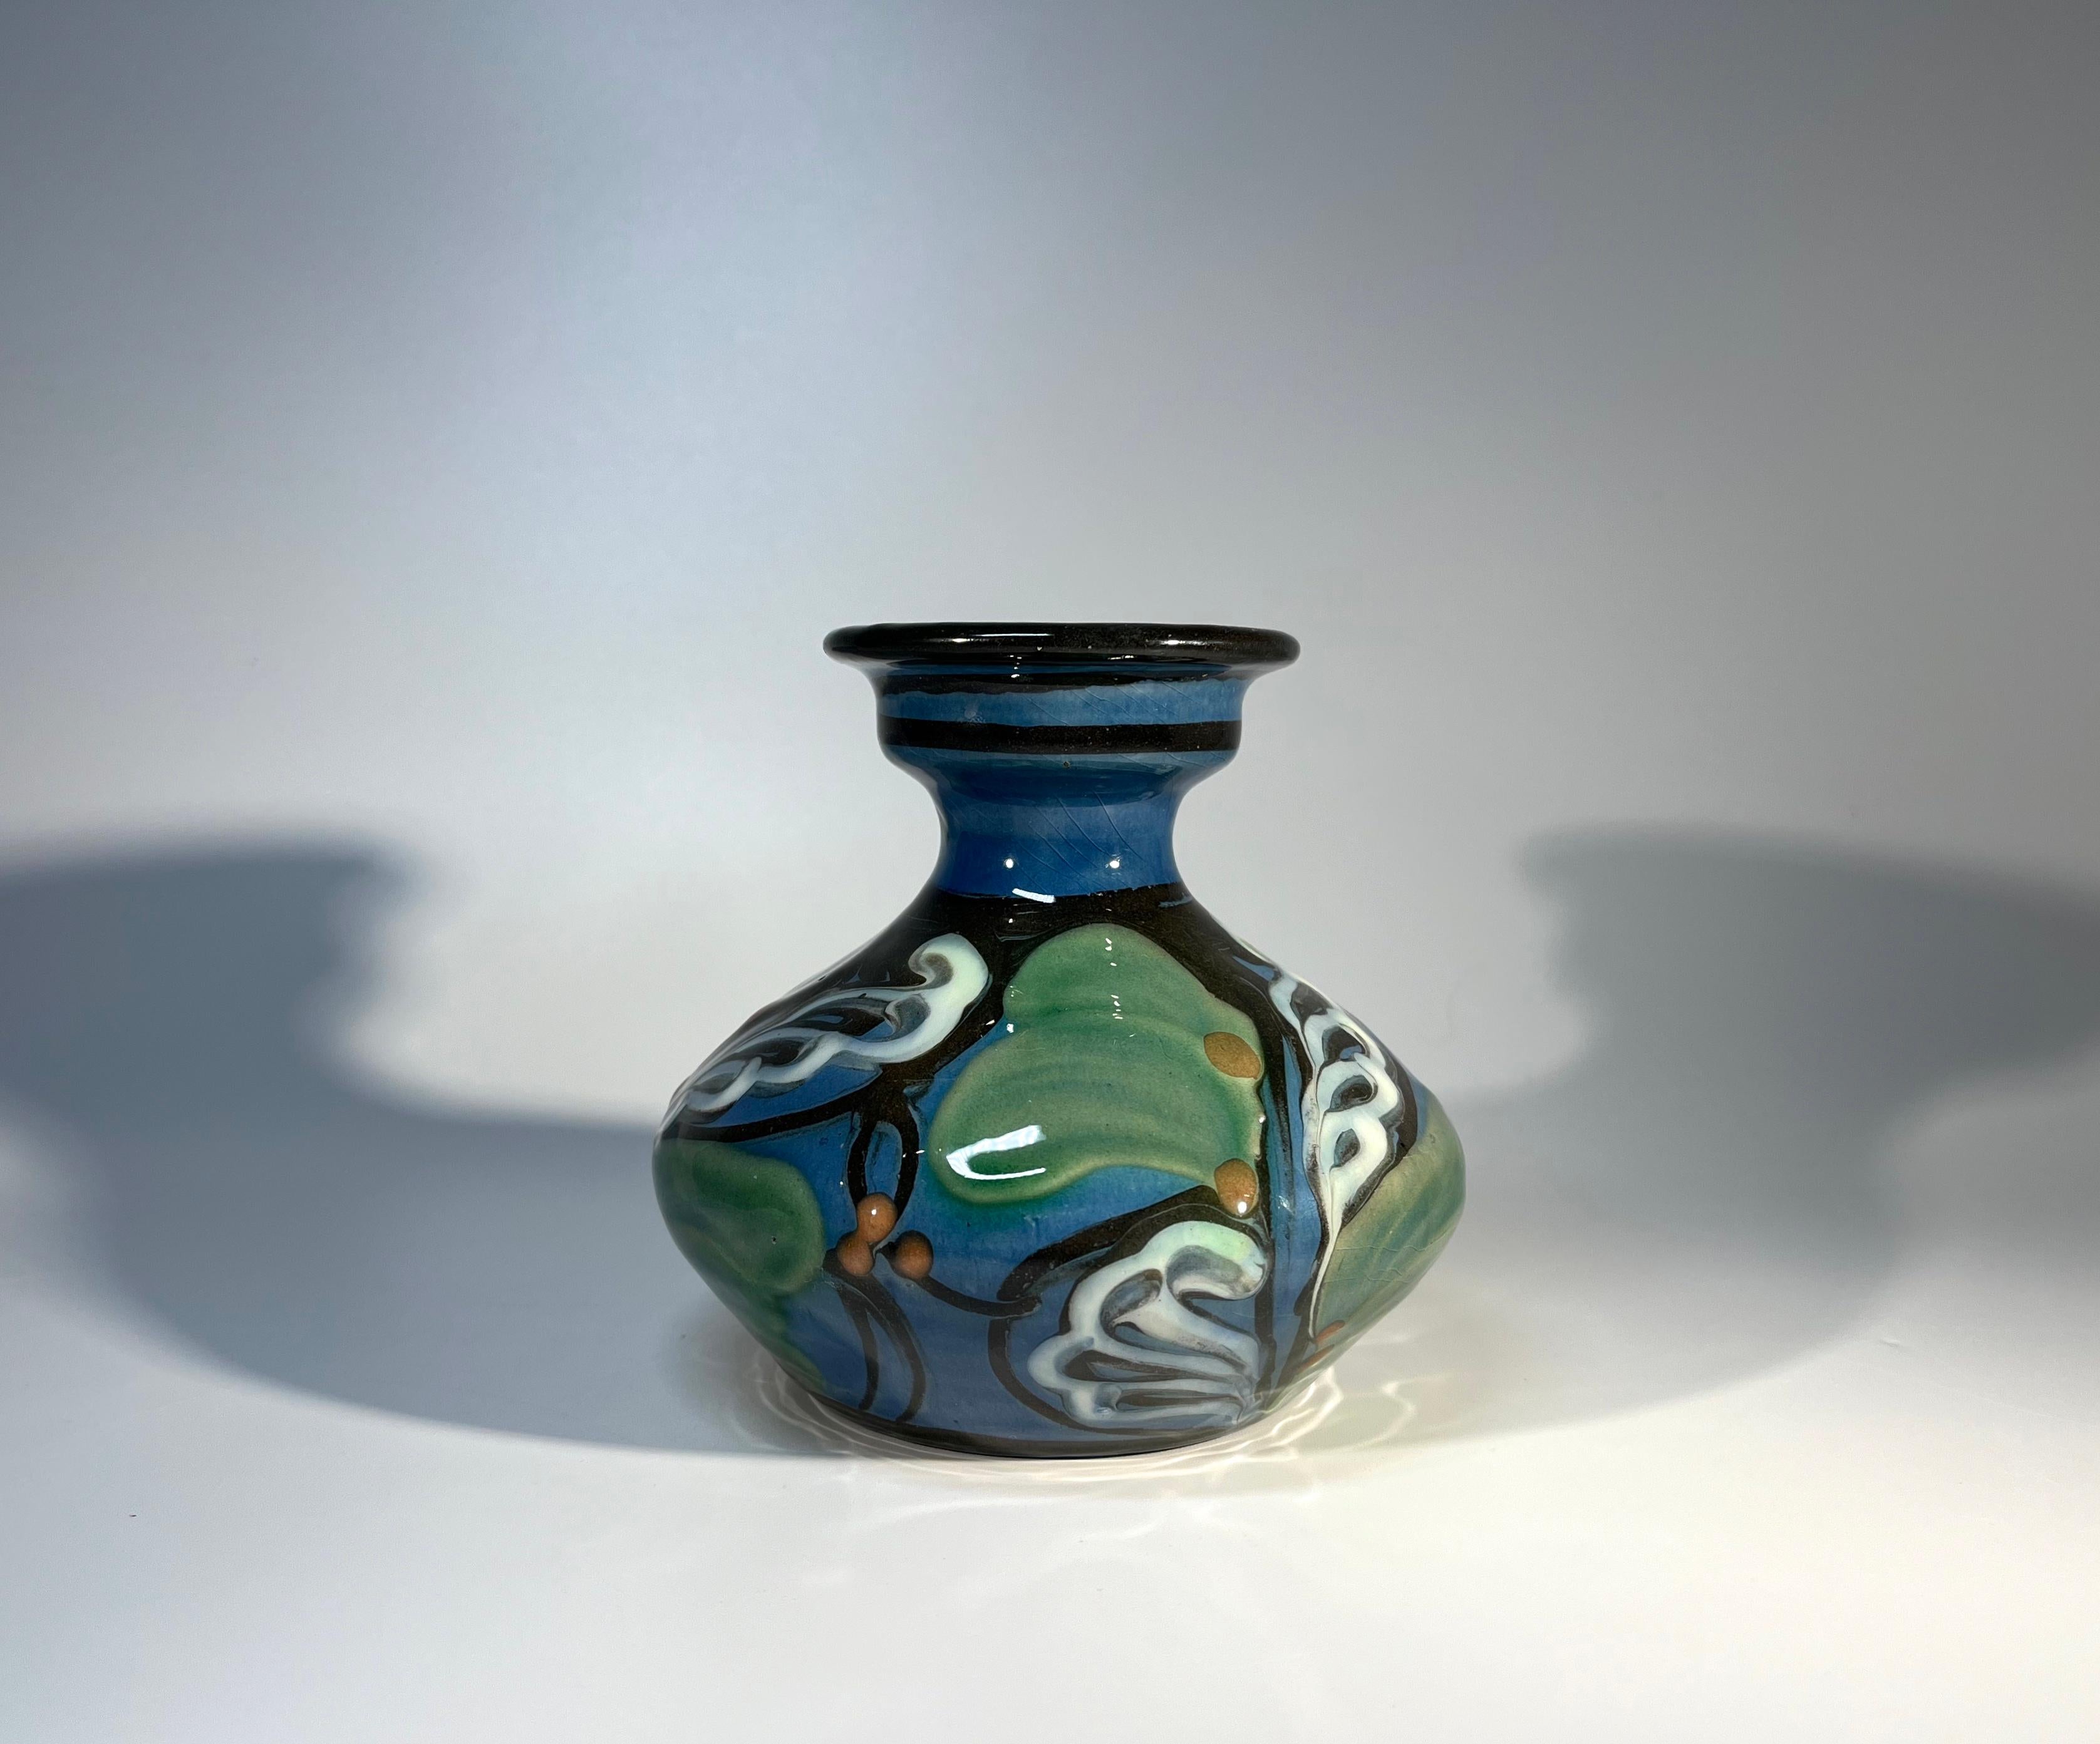 Art nouveau in design and era, a fabulously glazed ceramic vase by Horsens Danico Denmark
A super little vase to collect
Circa 1920's
Signed Danico, 221 Denmark
Height 4.25 inch, Diameter 4.75 inch
Very good condition. Clean crazing to interior